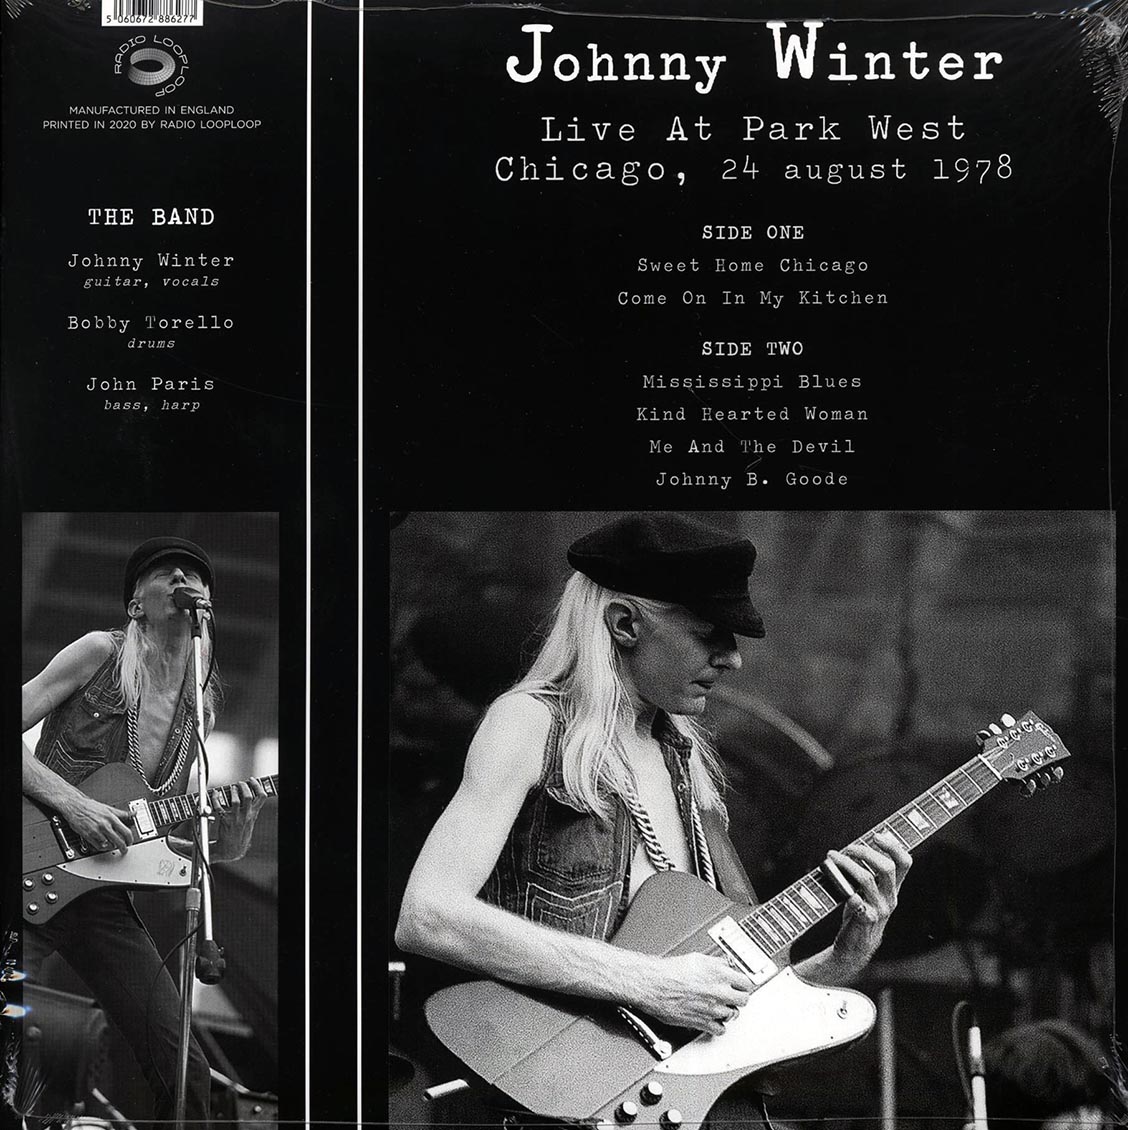 Johnny Winter (조니 윈터) - Live At Park West Chicago, 24 August 1978 [LP] 